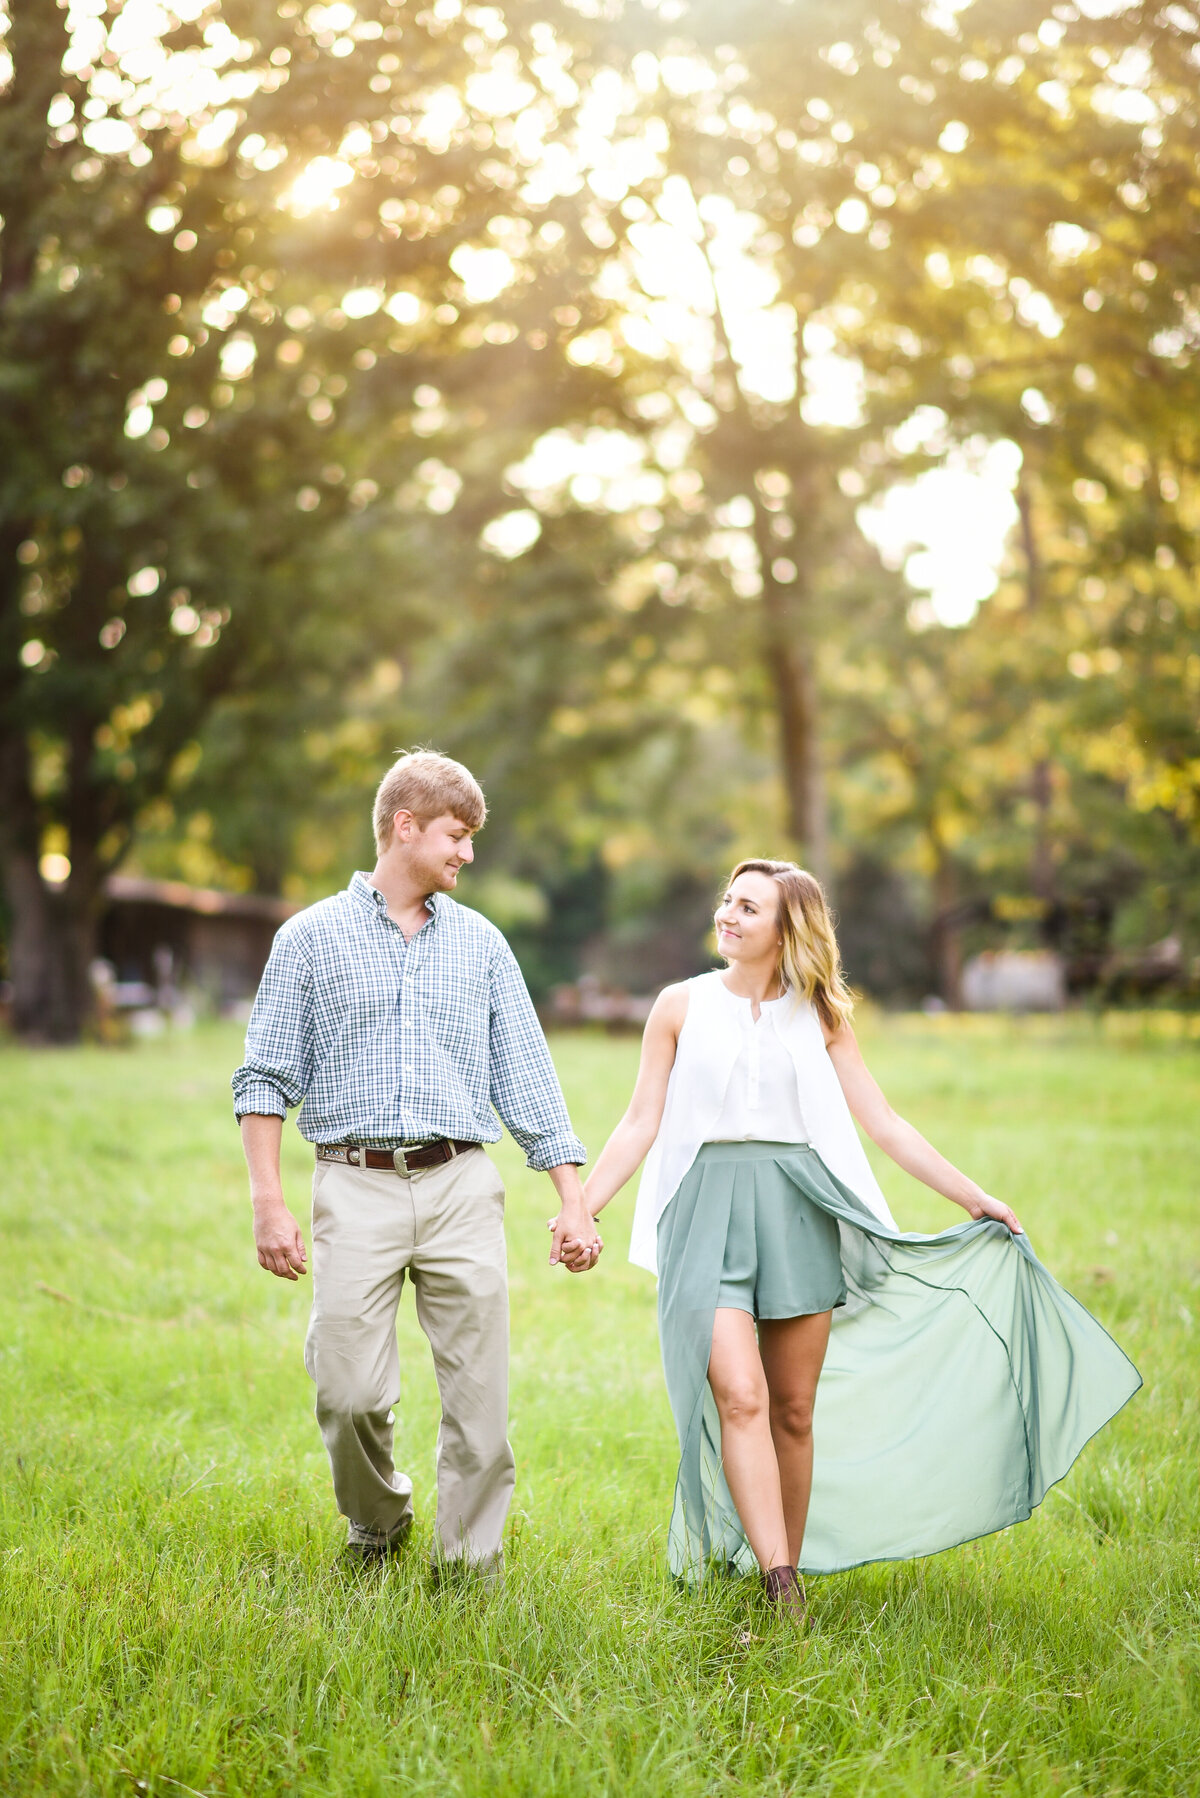 Beautiful Mississippi Engagement Photography: couple walks holding hands in a field during sunset with bride in flowy skirt